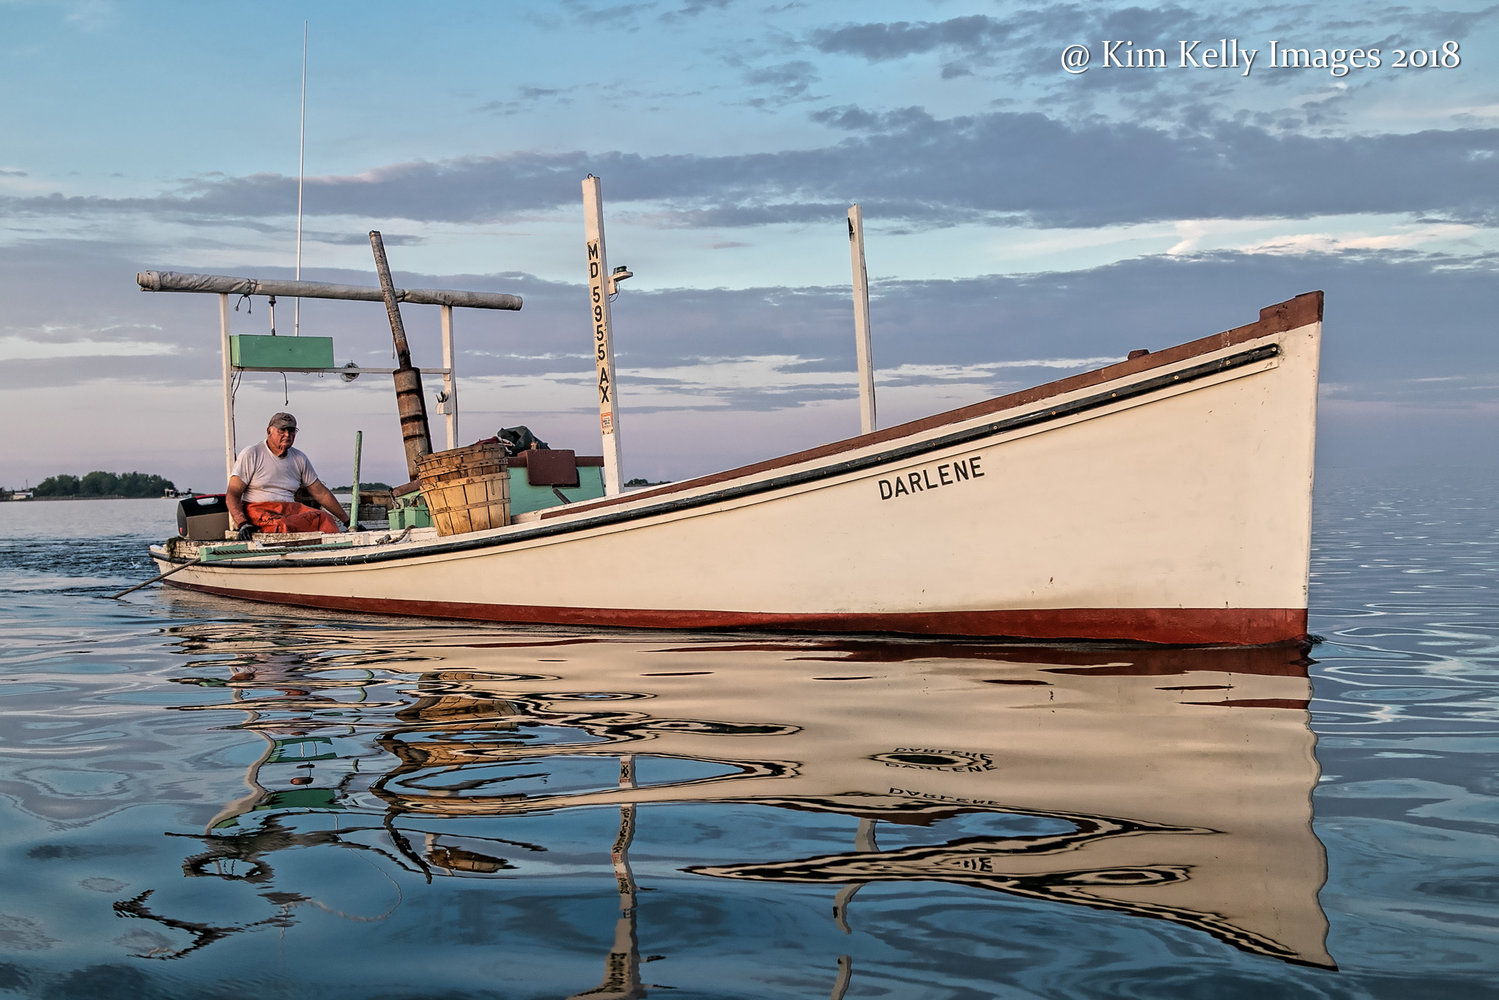 Kim Kelly likes capturing images that depict the Chesapeake Bay. This photo is called “A Time For Reflection”